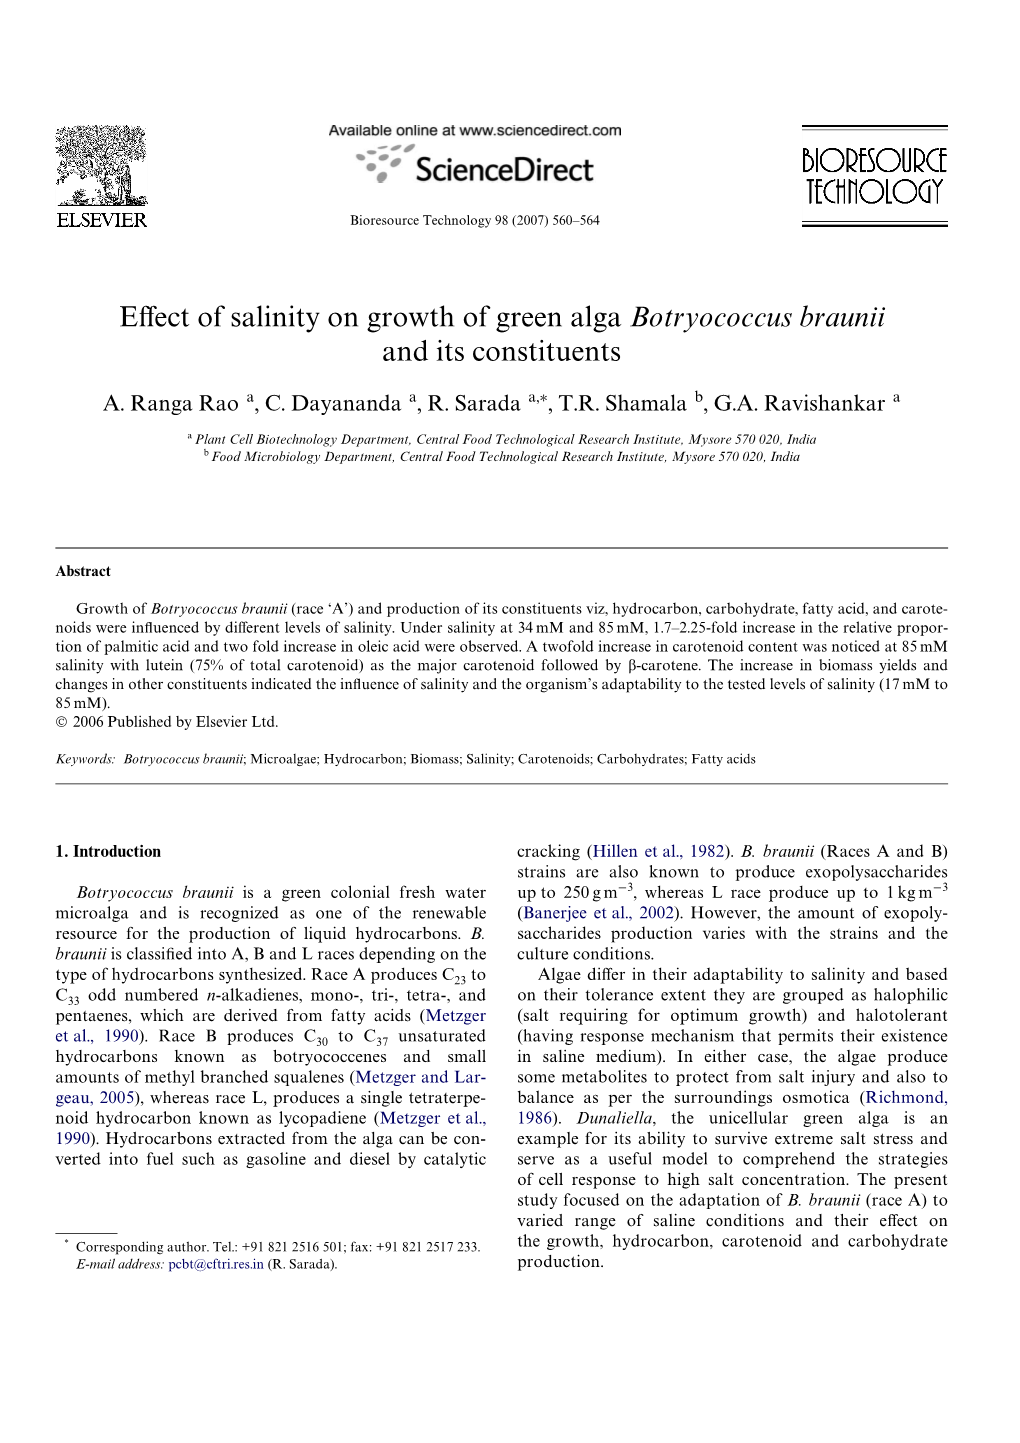 Effect of Salinity on Growth of Green Alga Botryococcus Braunii and Its